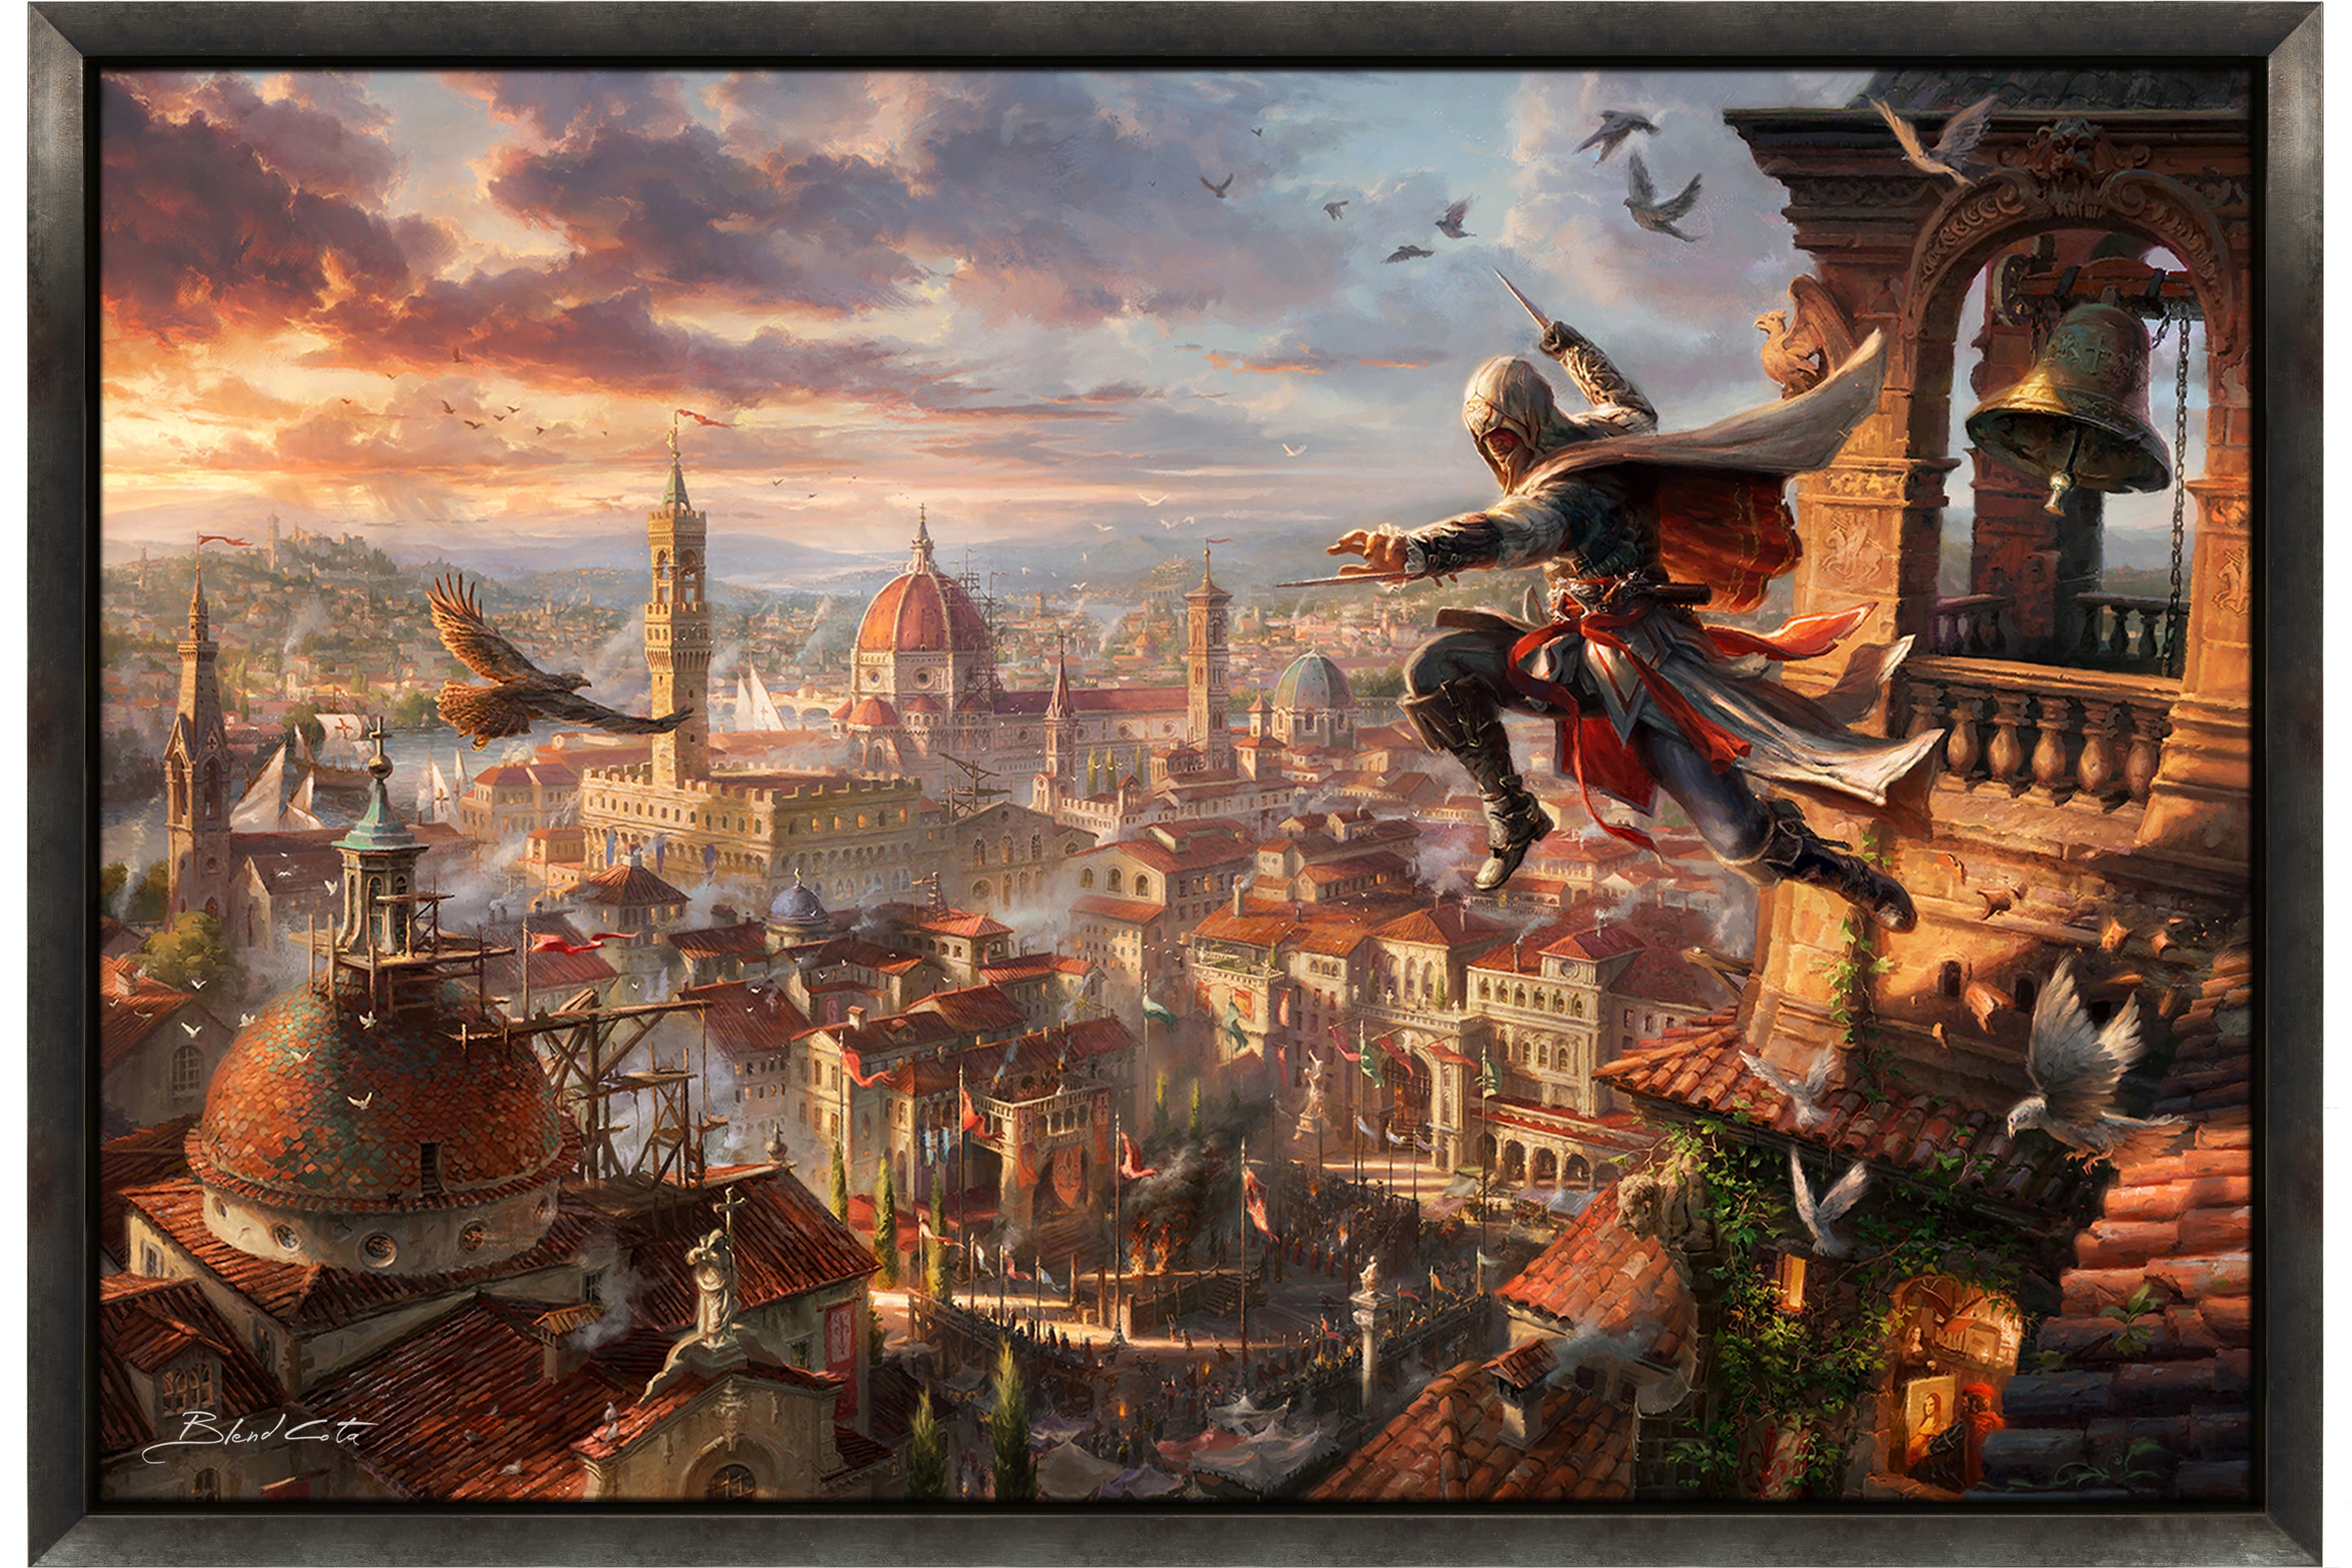 Framed original oil on canvas painting of Assassin's Creed Florence and Ezio Auditore meticulously designed and painted with intricate details in a realistic style.